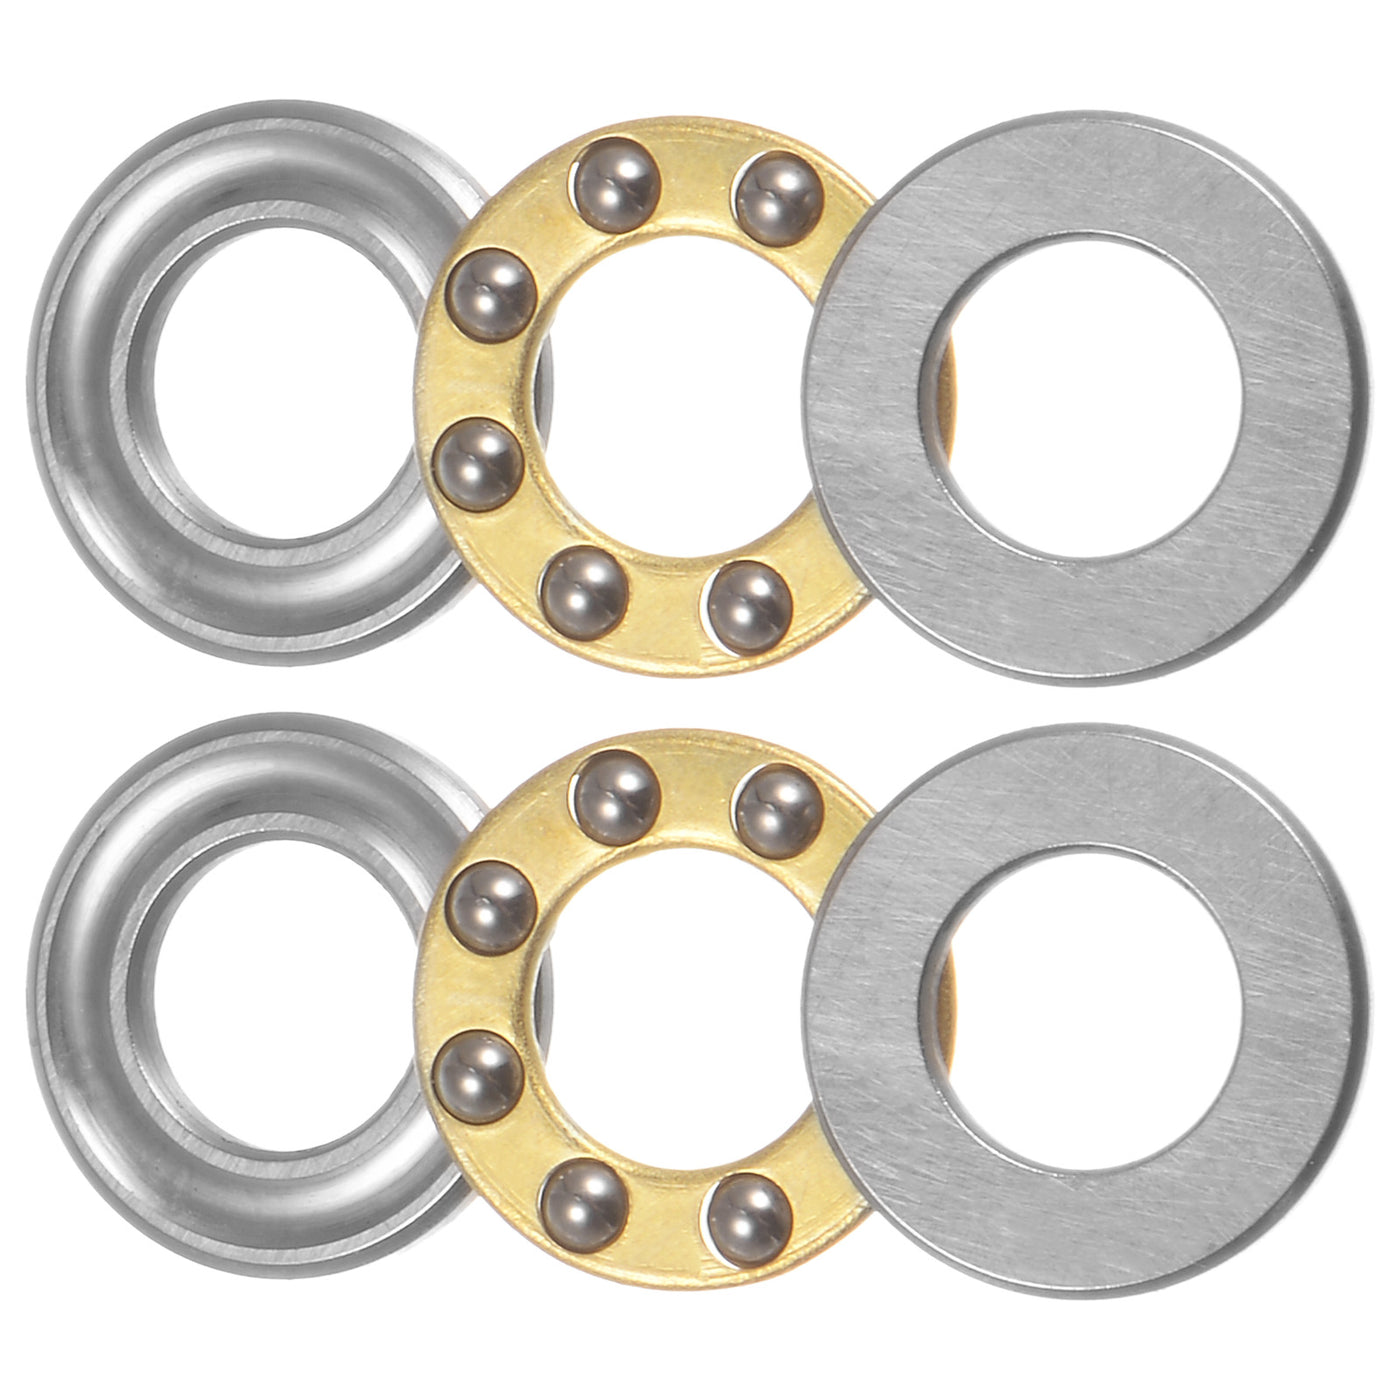 uxcell Uxcell F7-13M Thrust Ball Bearing 7x13x5mm Brass with Washers 2pcs